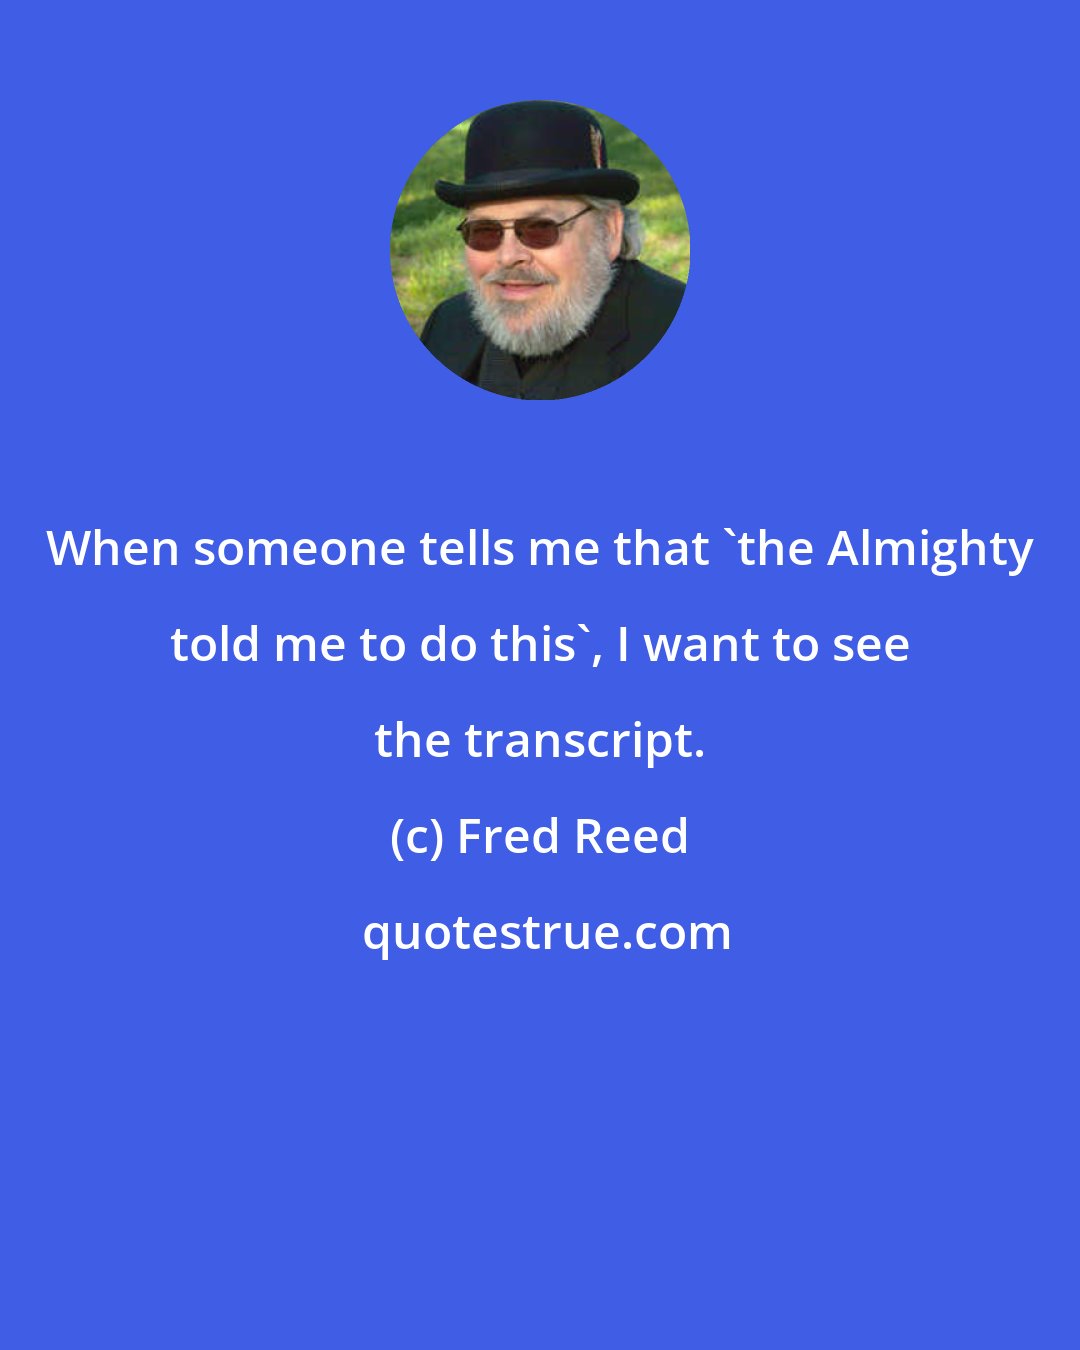 Fred Reed: When someone tells me that 'the Almighty told me to do this', I want to see the transcript.